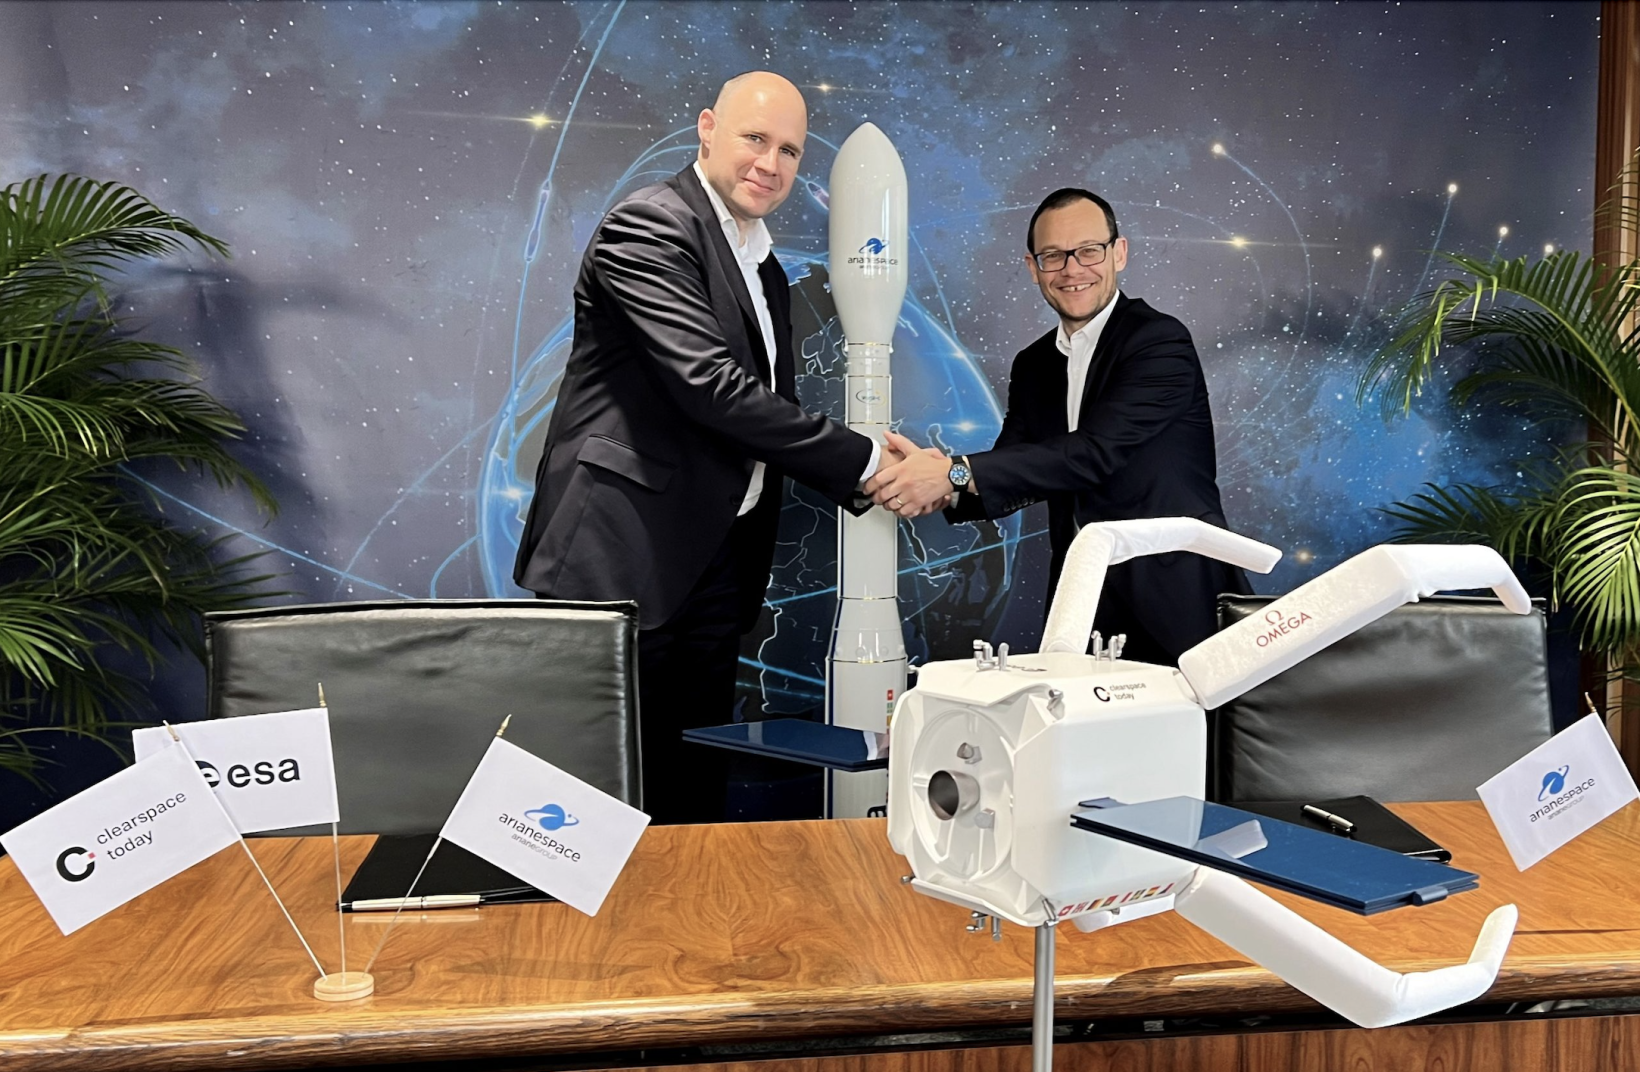 Luc Piguet, ClearSpace CEO and co-founder, and Stéphane Israël, Arianespace CEO, signing a contract for the launch of the ClearSpace-1 mission, due in 2026. Credit: Arianespace, ClearSpace